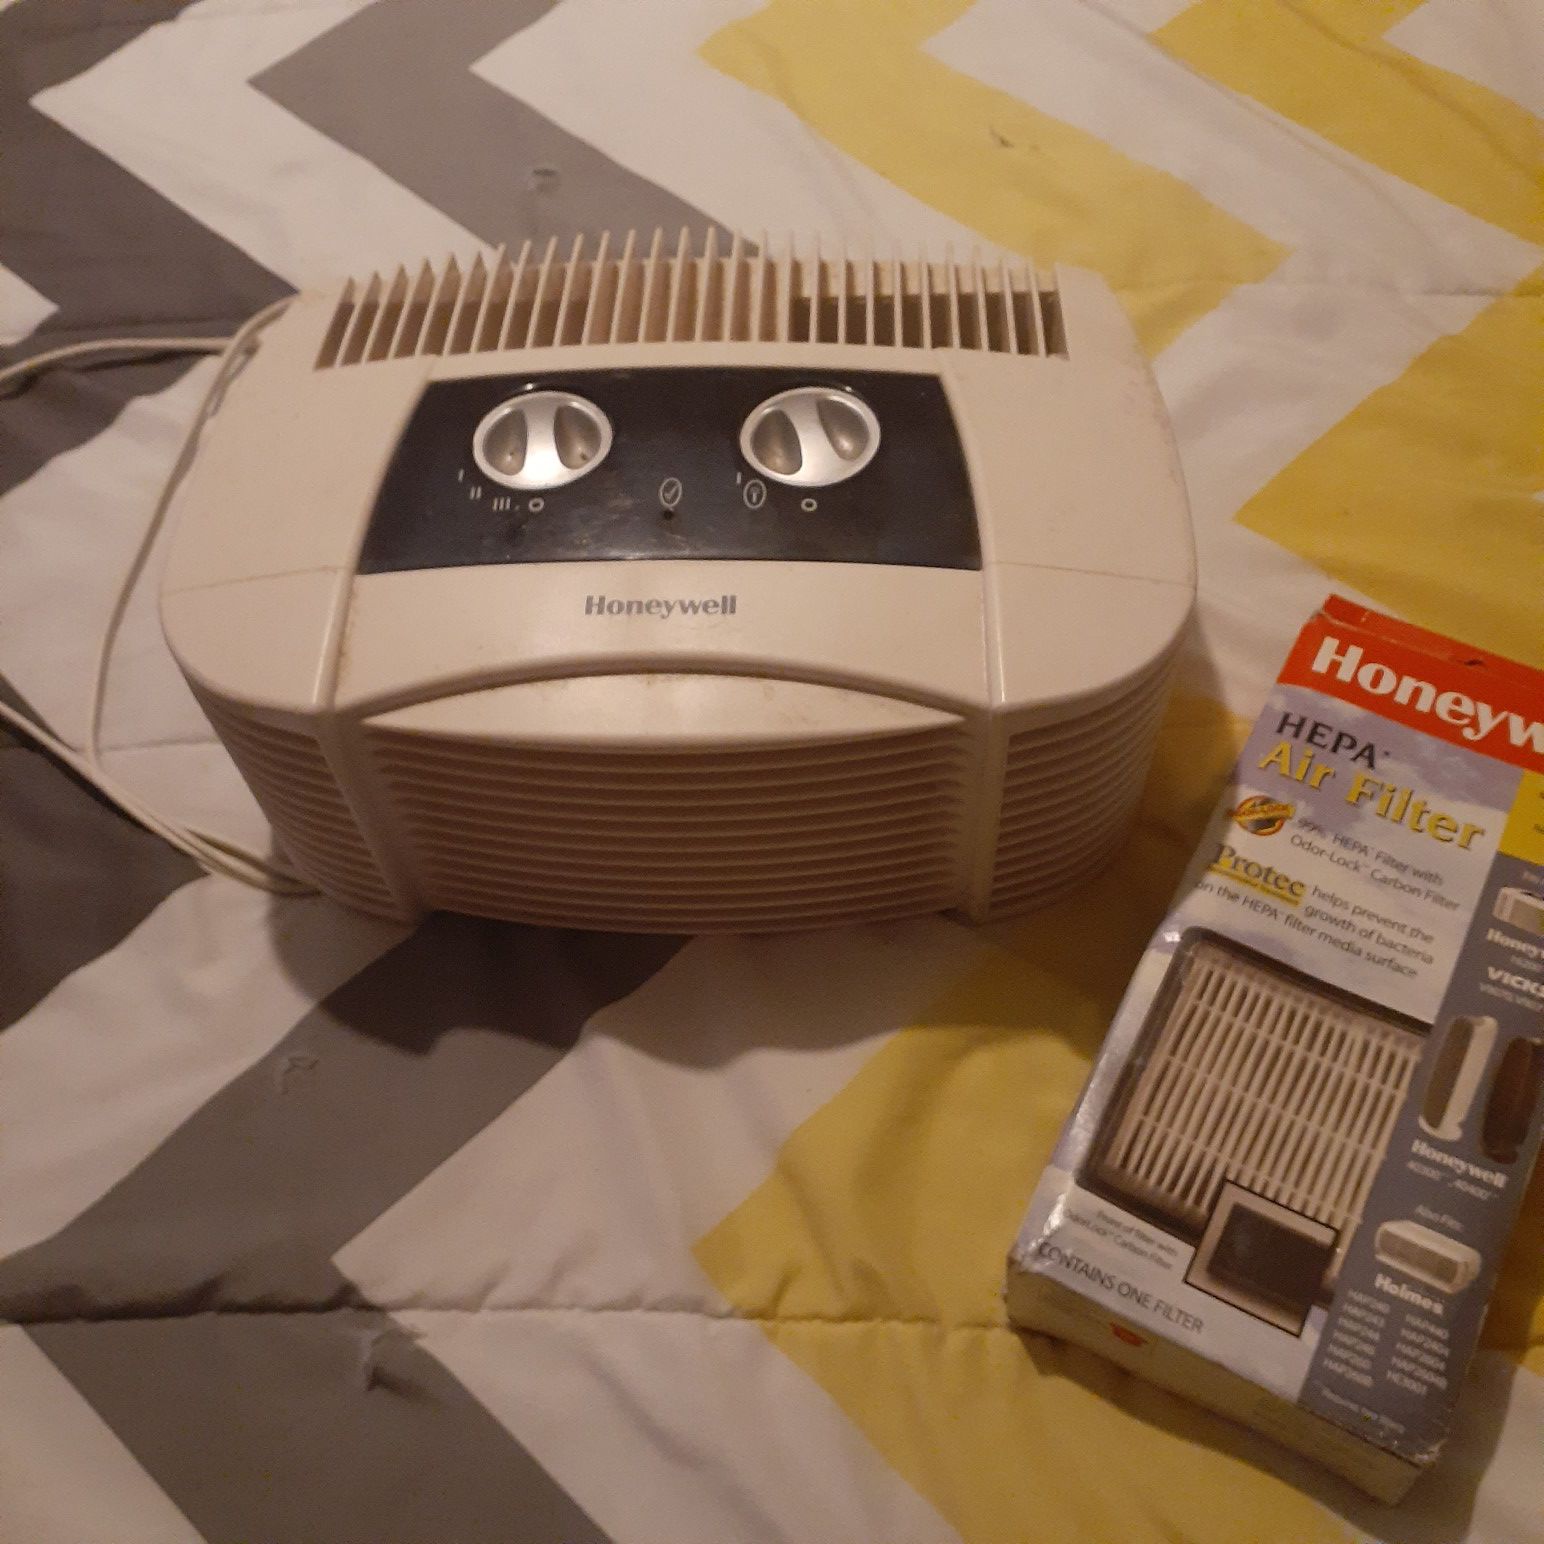 Honeywell's air humidifier and new filter